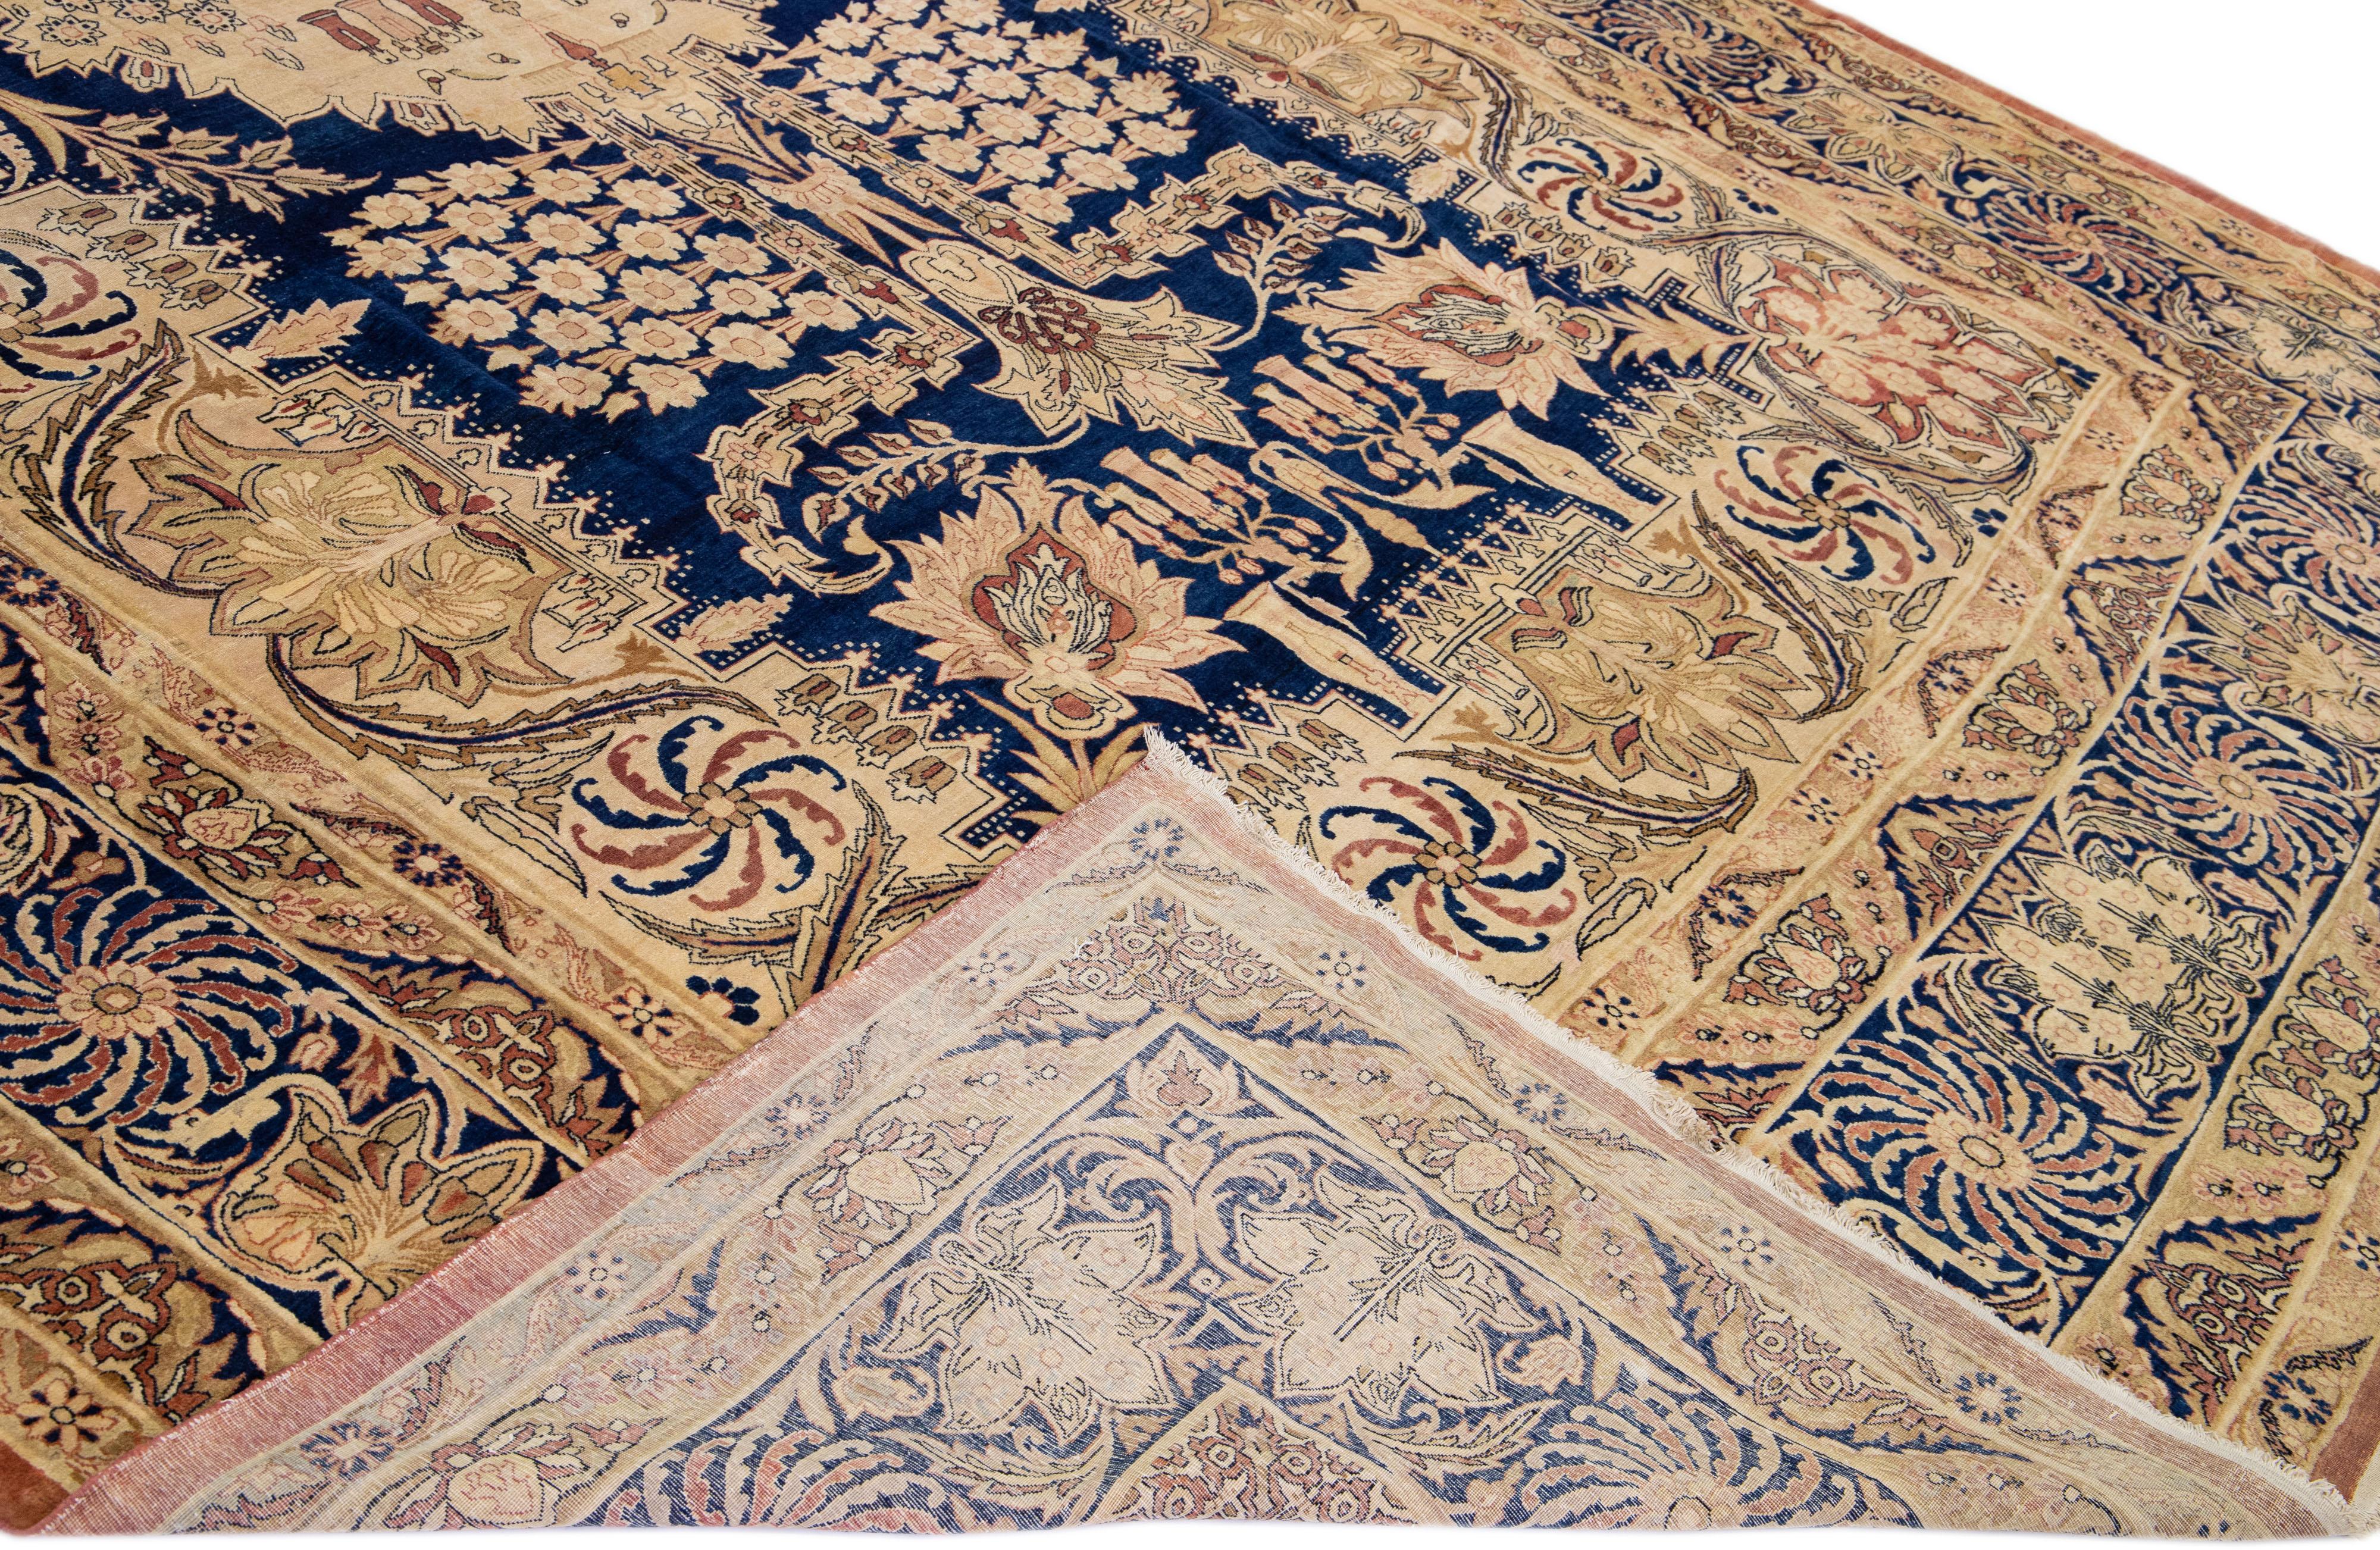 Beautiful antique Kerman hand-knotted wool rug with a beige field. This Persian rug has blue and brown accents in a gorgeous all-over medallion floral pattern design.

This rug measures: 11'5